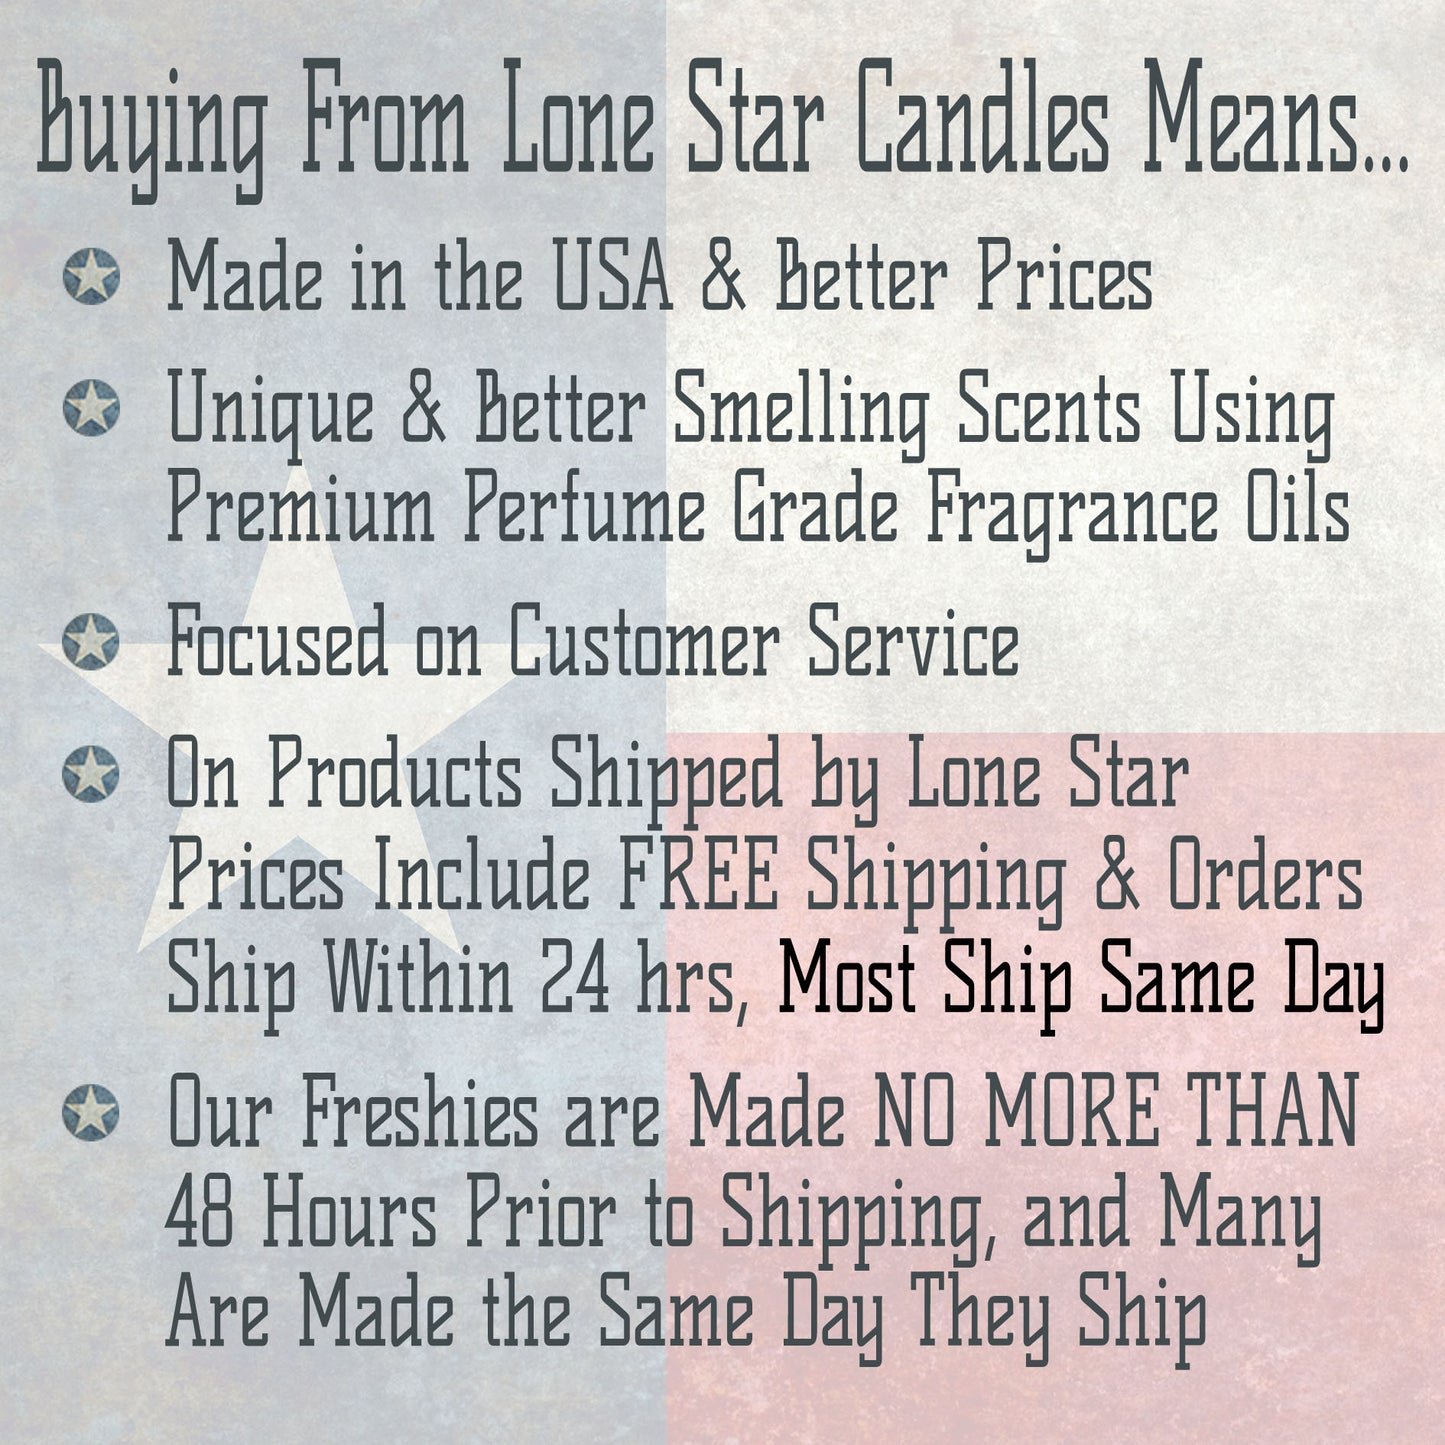 Cranberries & Sandalwood, Lone Star Candles & More's Premium Strongly Scented Freshies, A Delightful Mix of Spiced Cranberry, & Sandalwood, Car & Air Freshener, USA Made in Texas, Pumpkin 1-Pack